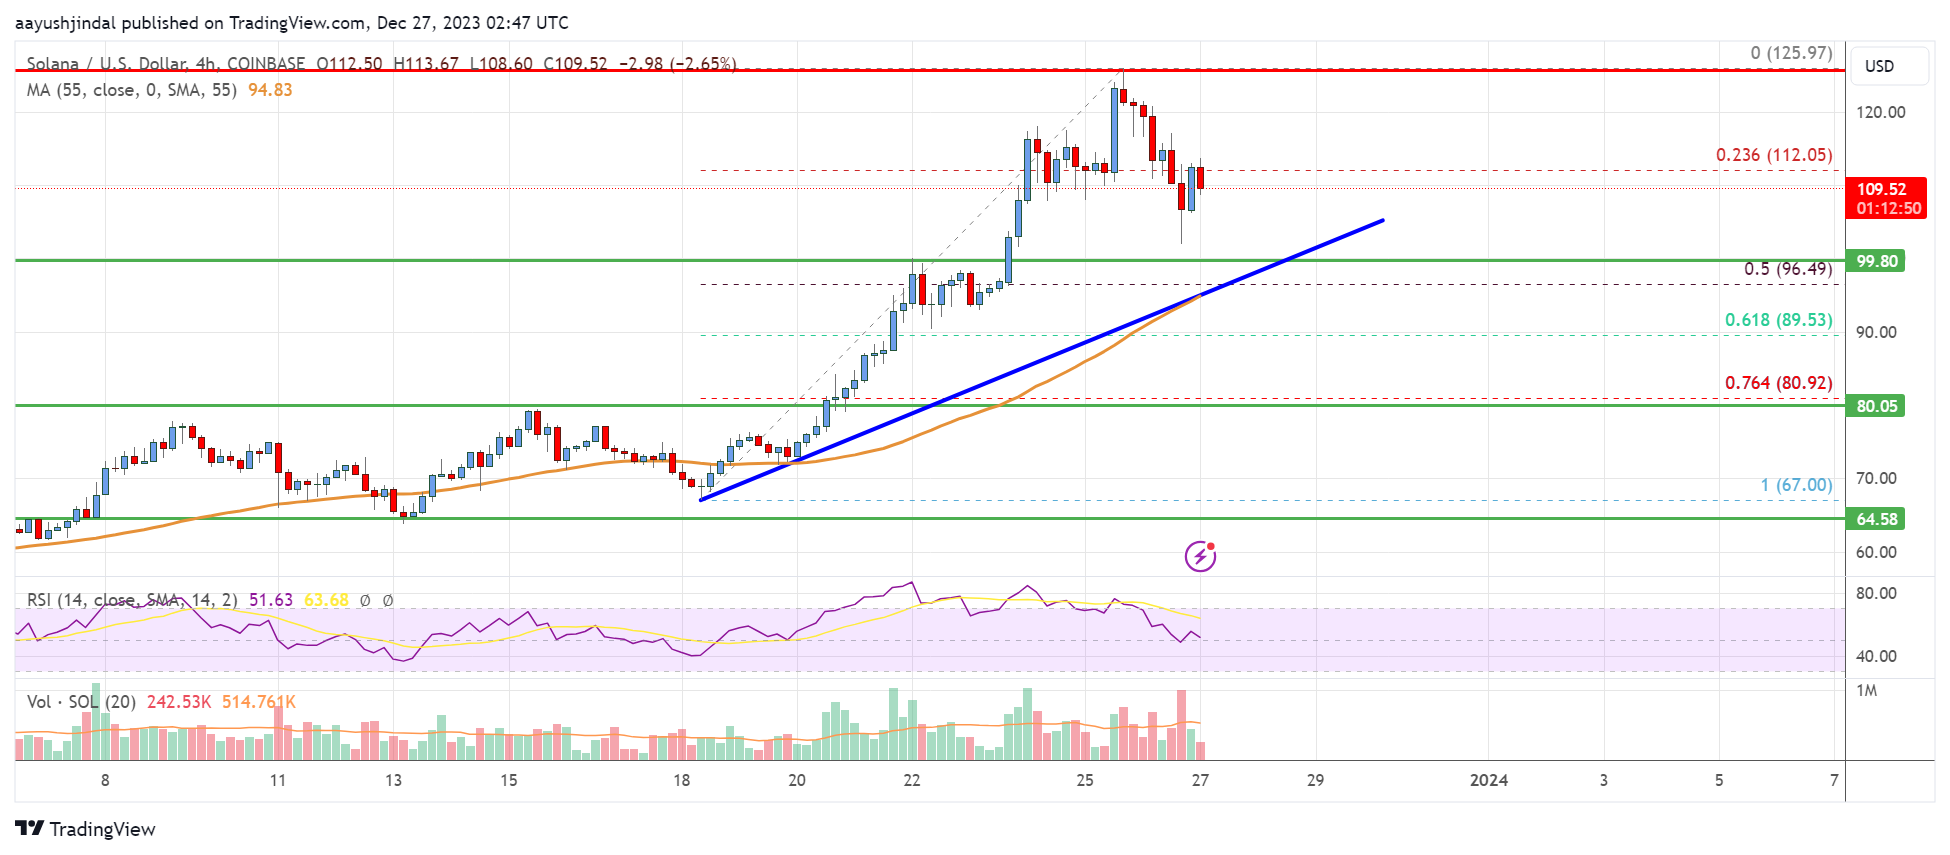 Solana (SOL) Price Analysis: Rally Could Extend To $140